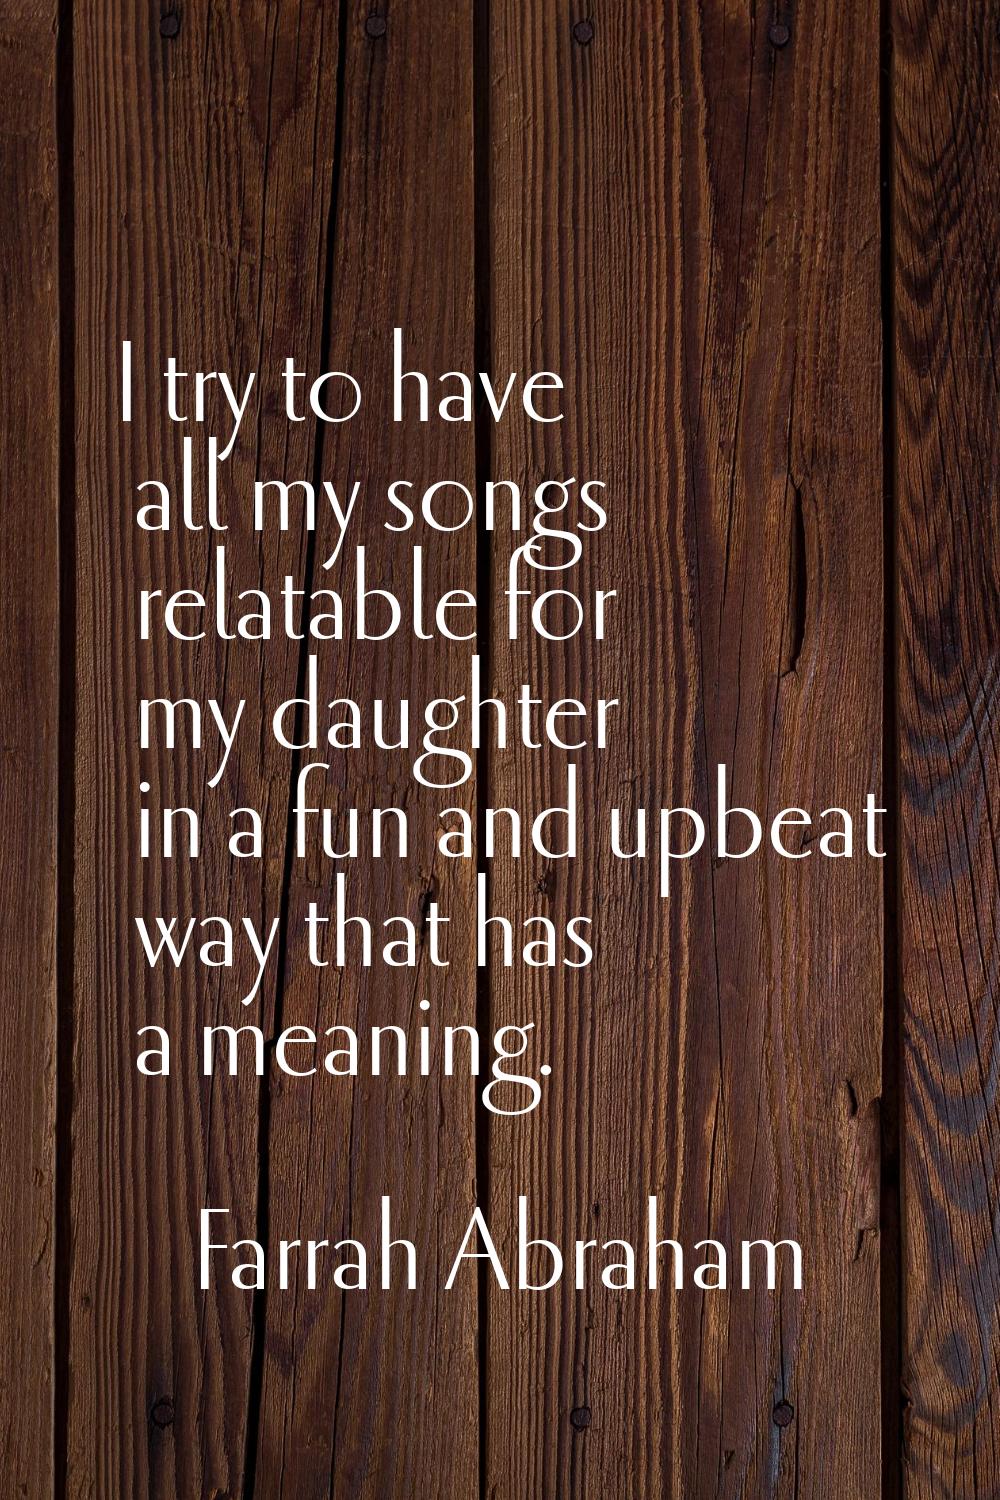 I try to have all my songs relatable for my daughter in a fun and upbeat way that has a meaning.